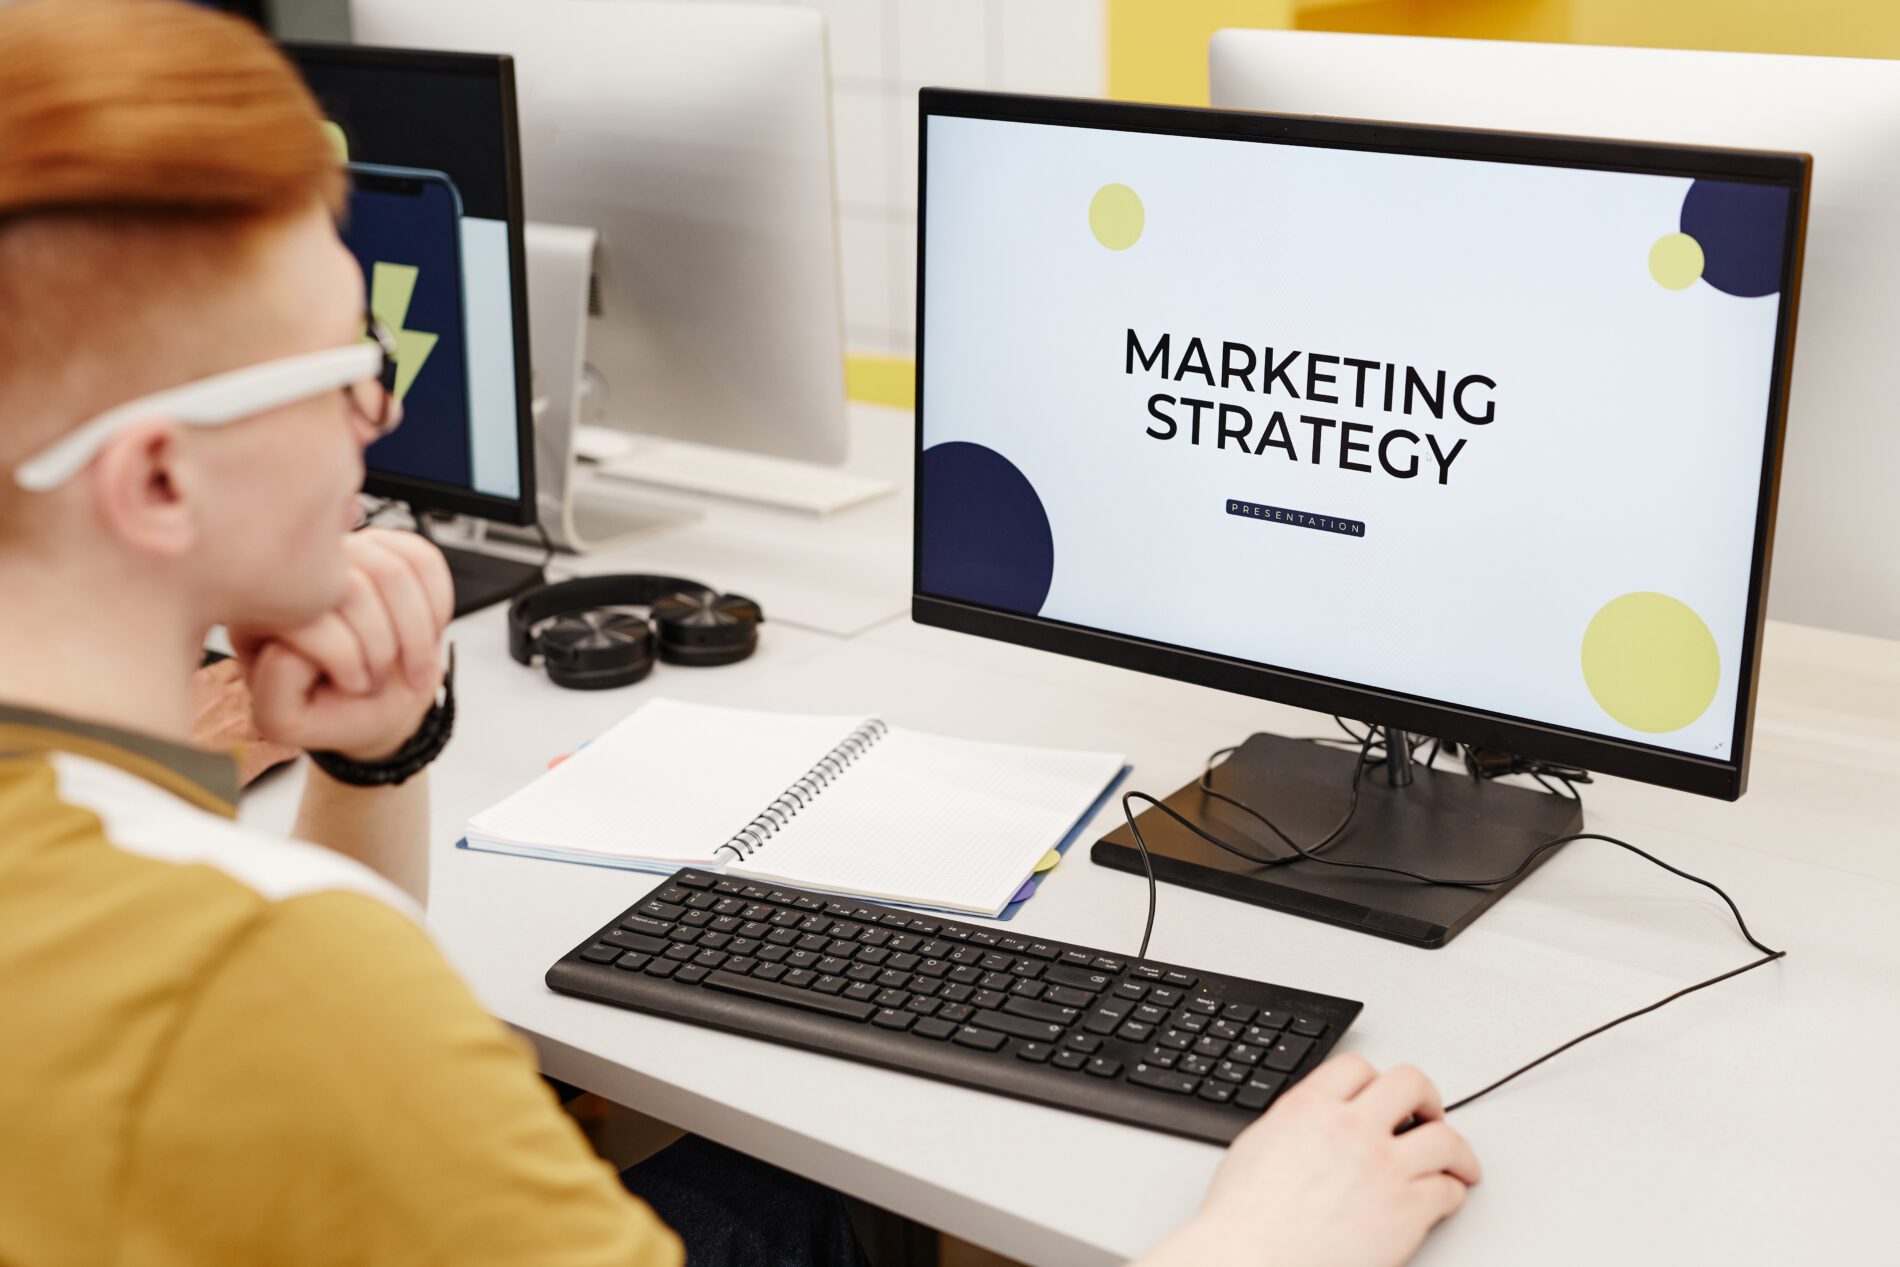 7 Key Elements You Need in Your Online Marketing Strategy